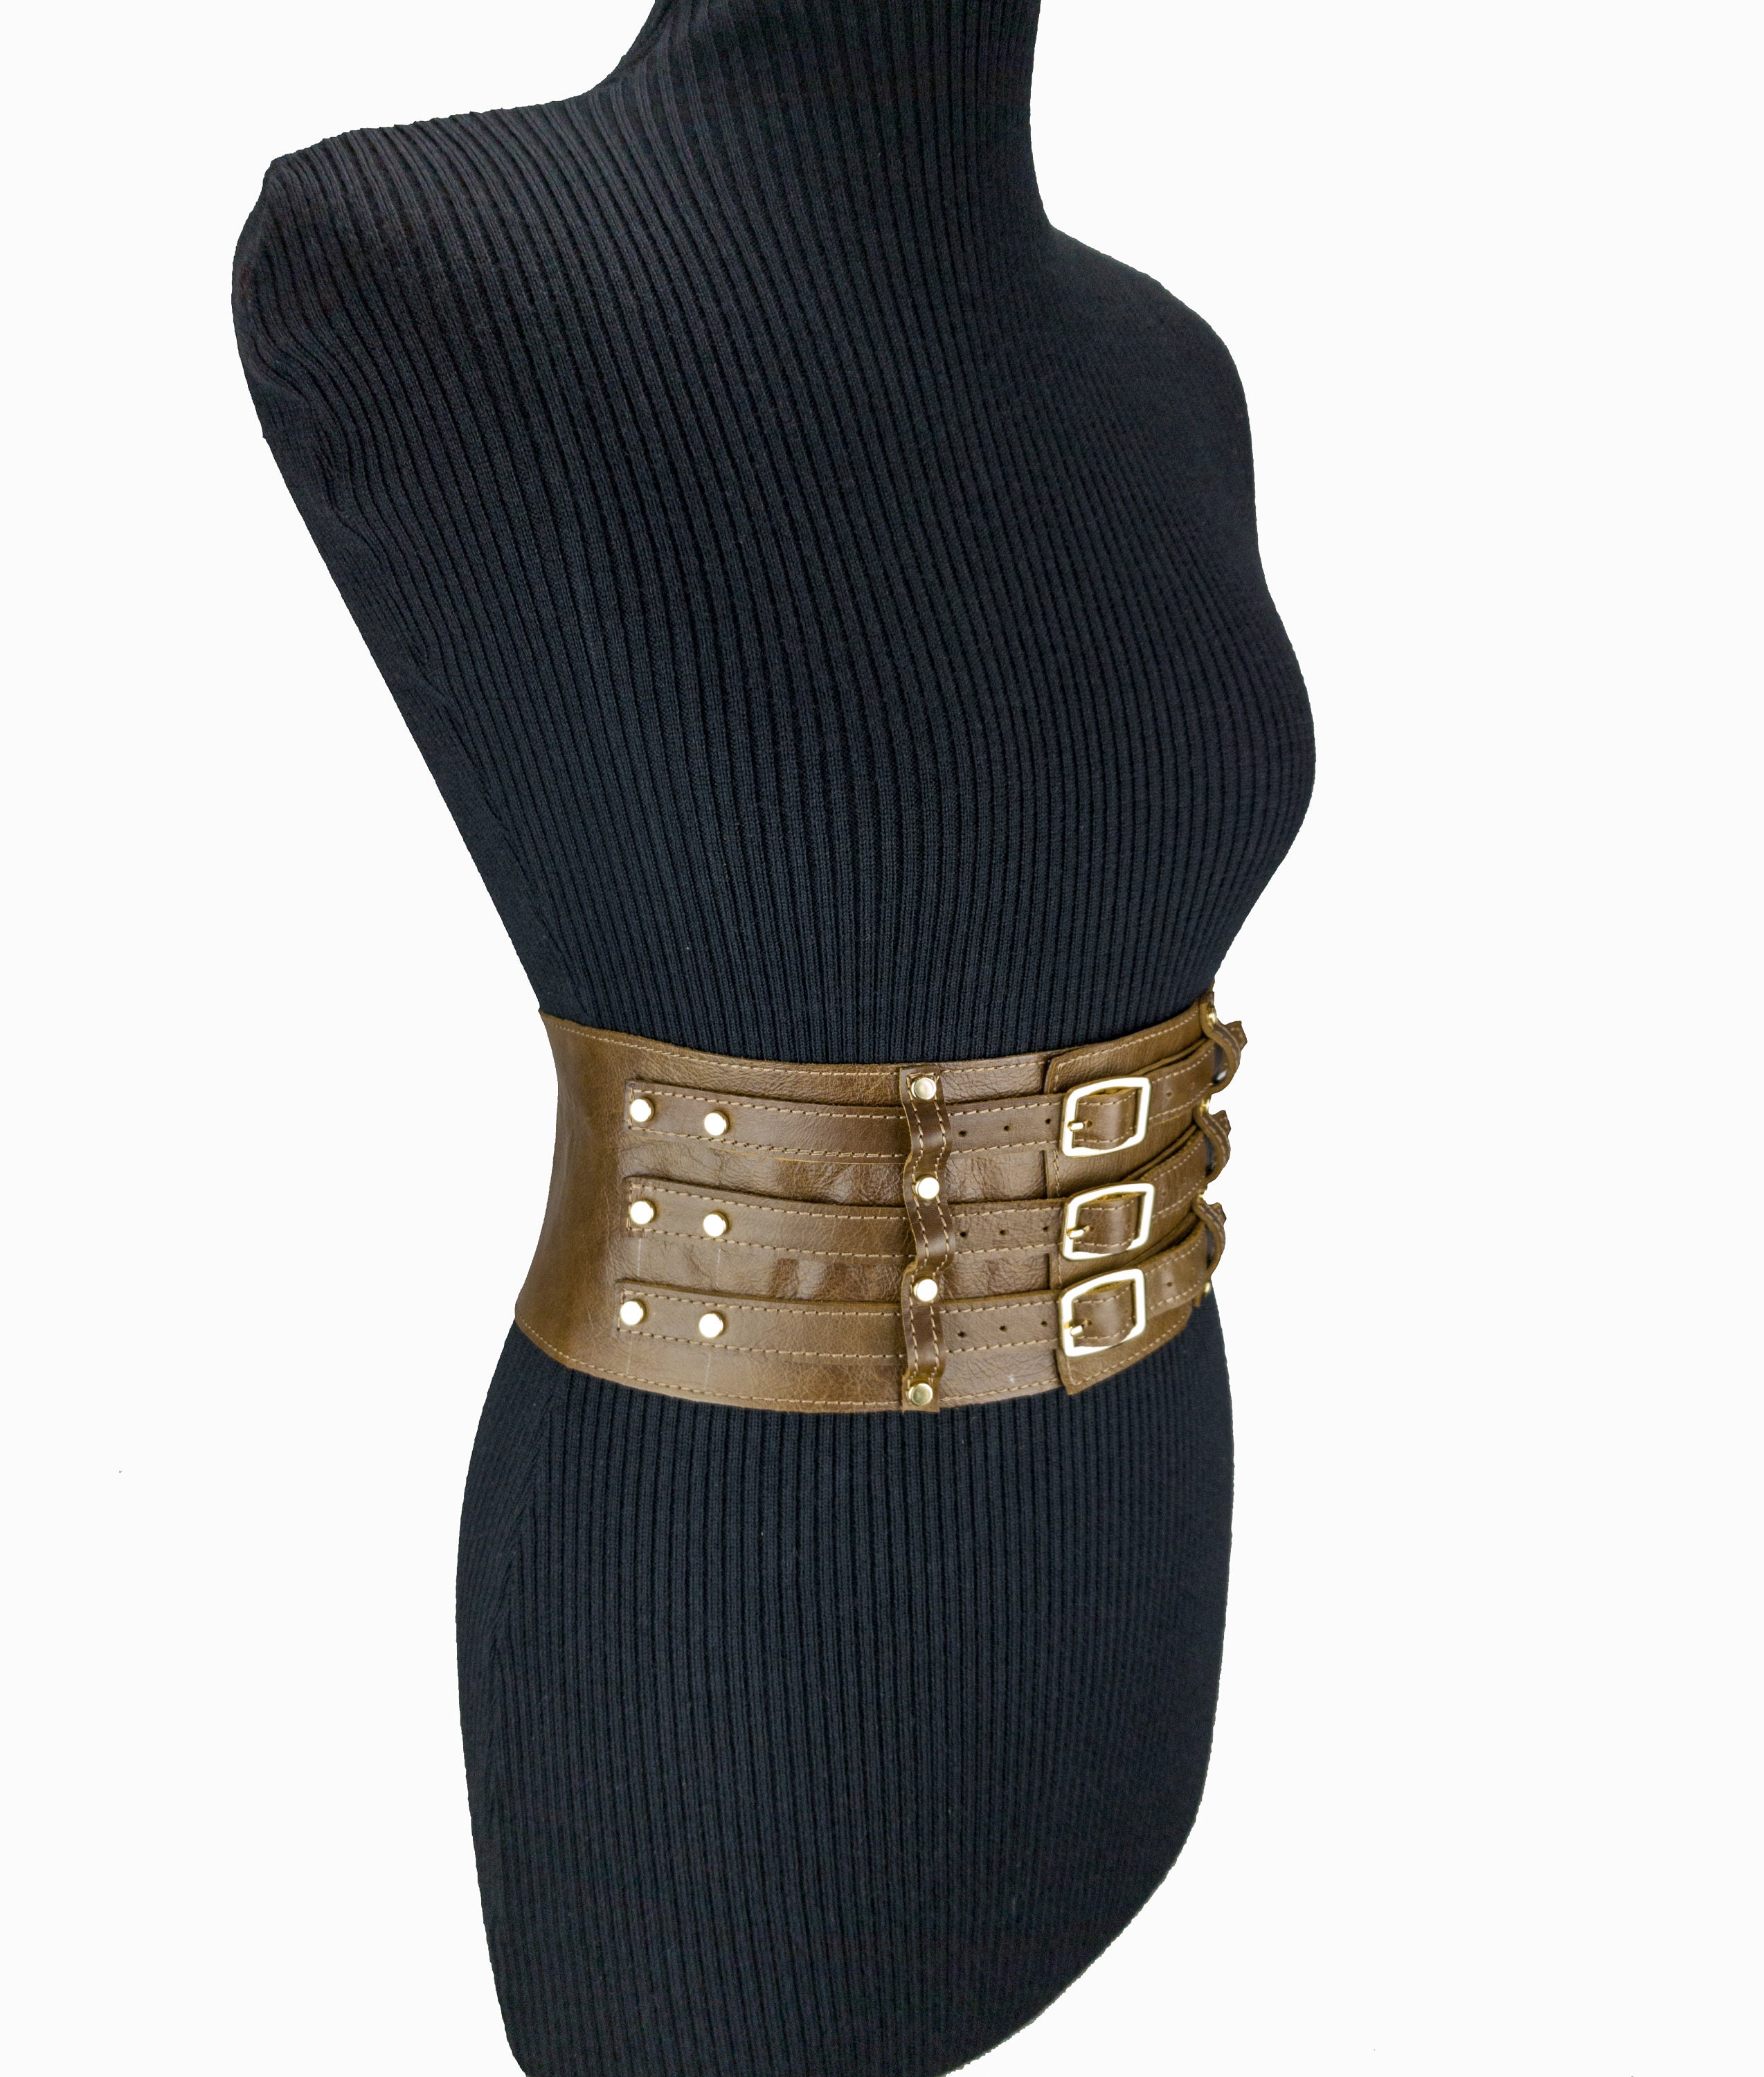 Wide Waist Leather Corset Belt With Three Buckles Wide Adjustable